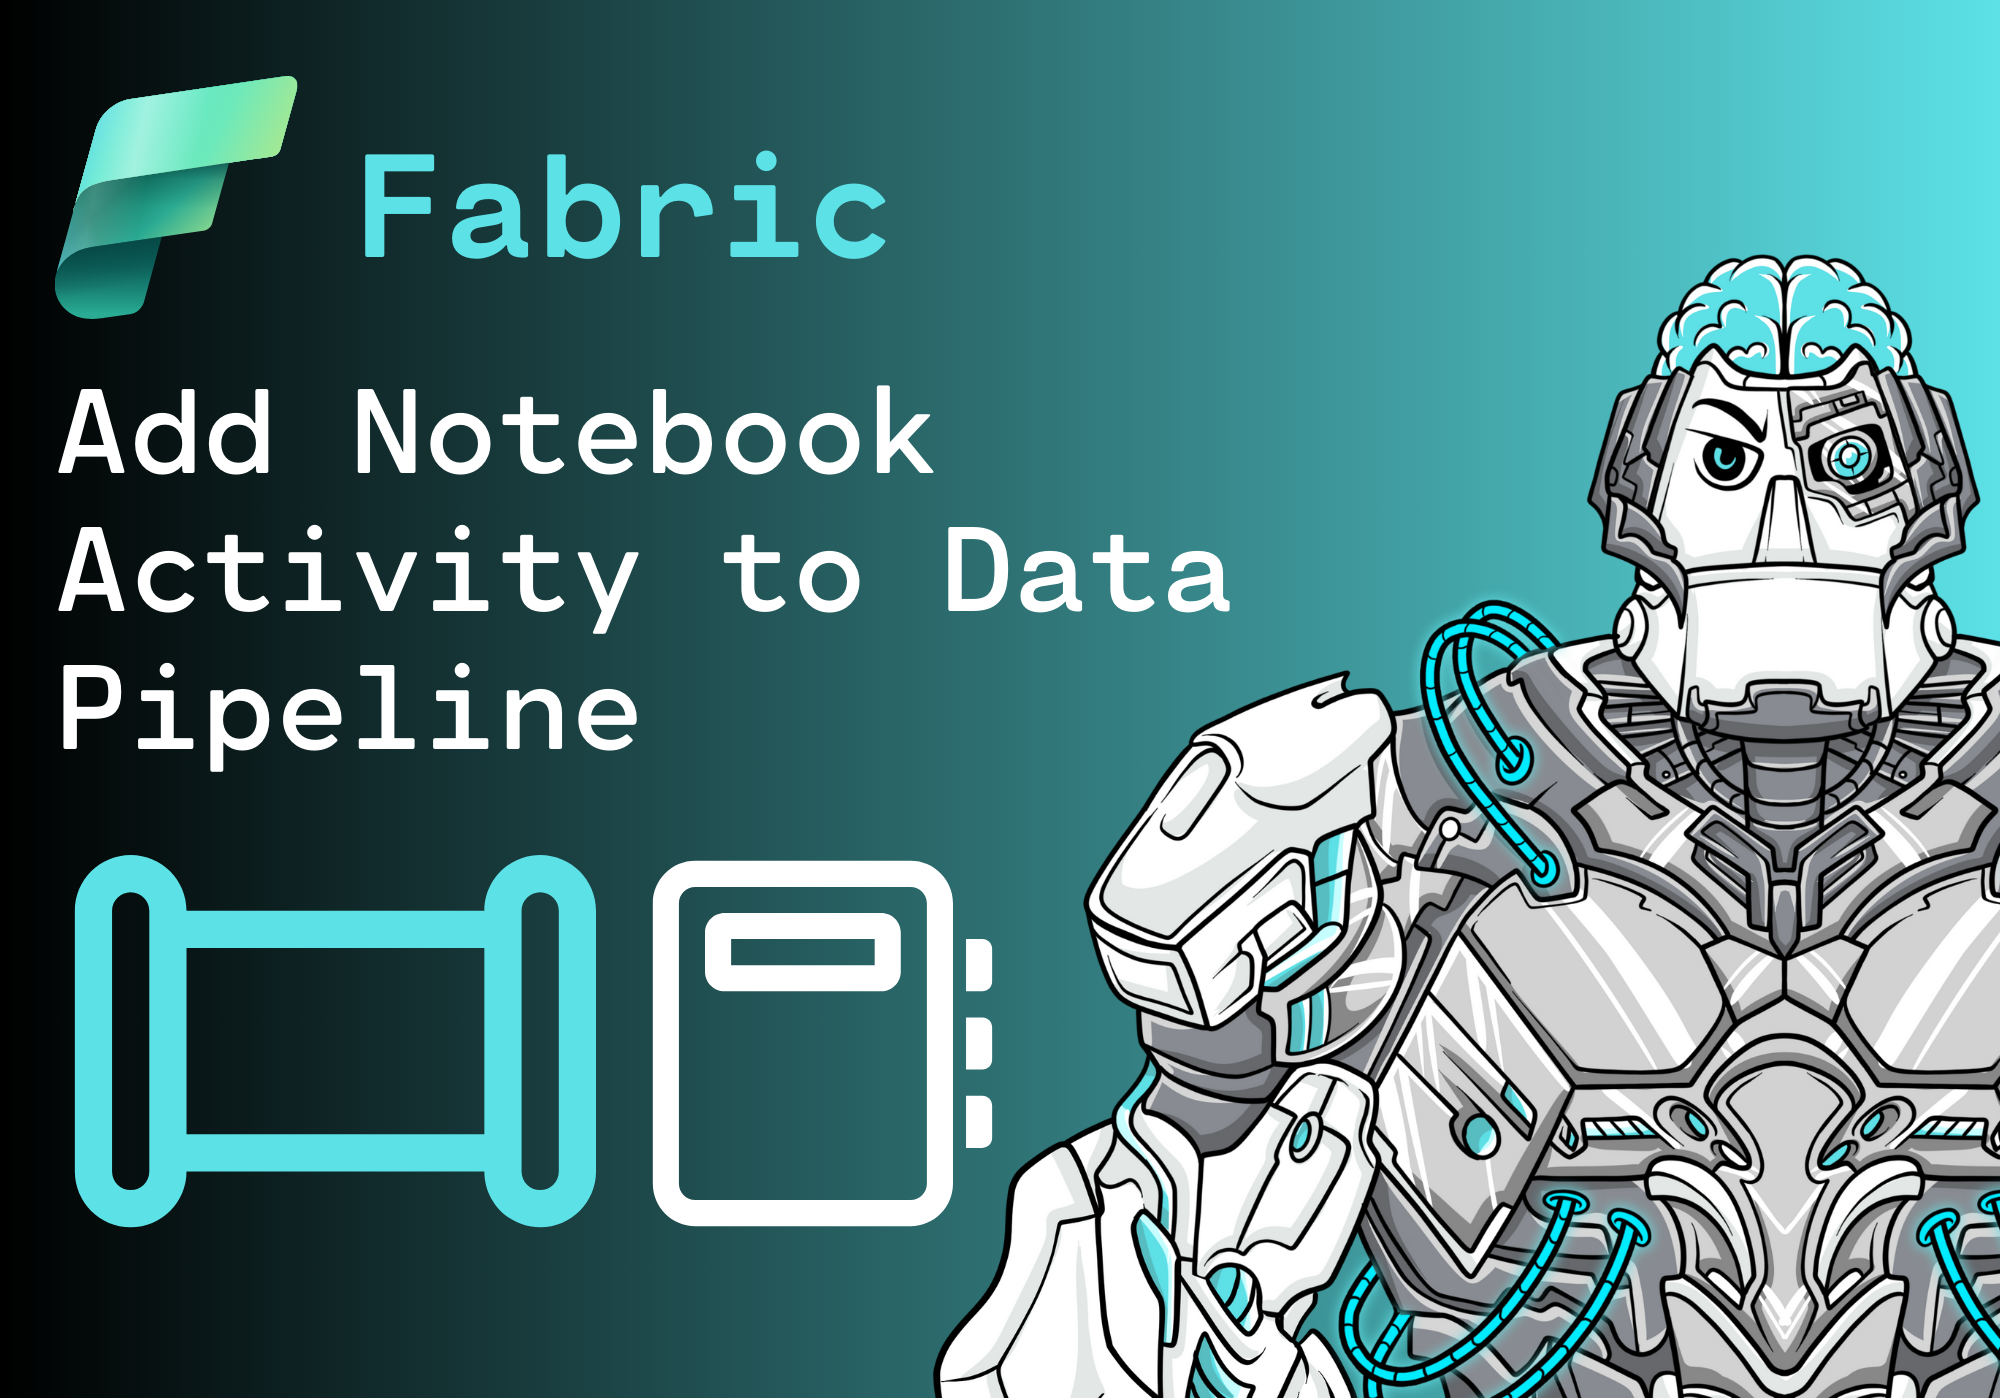 How to add Notebook Activity to a Data Pipeline in Microsoft Fabric